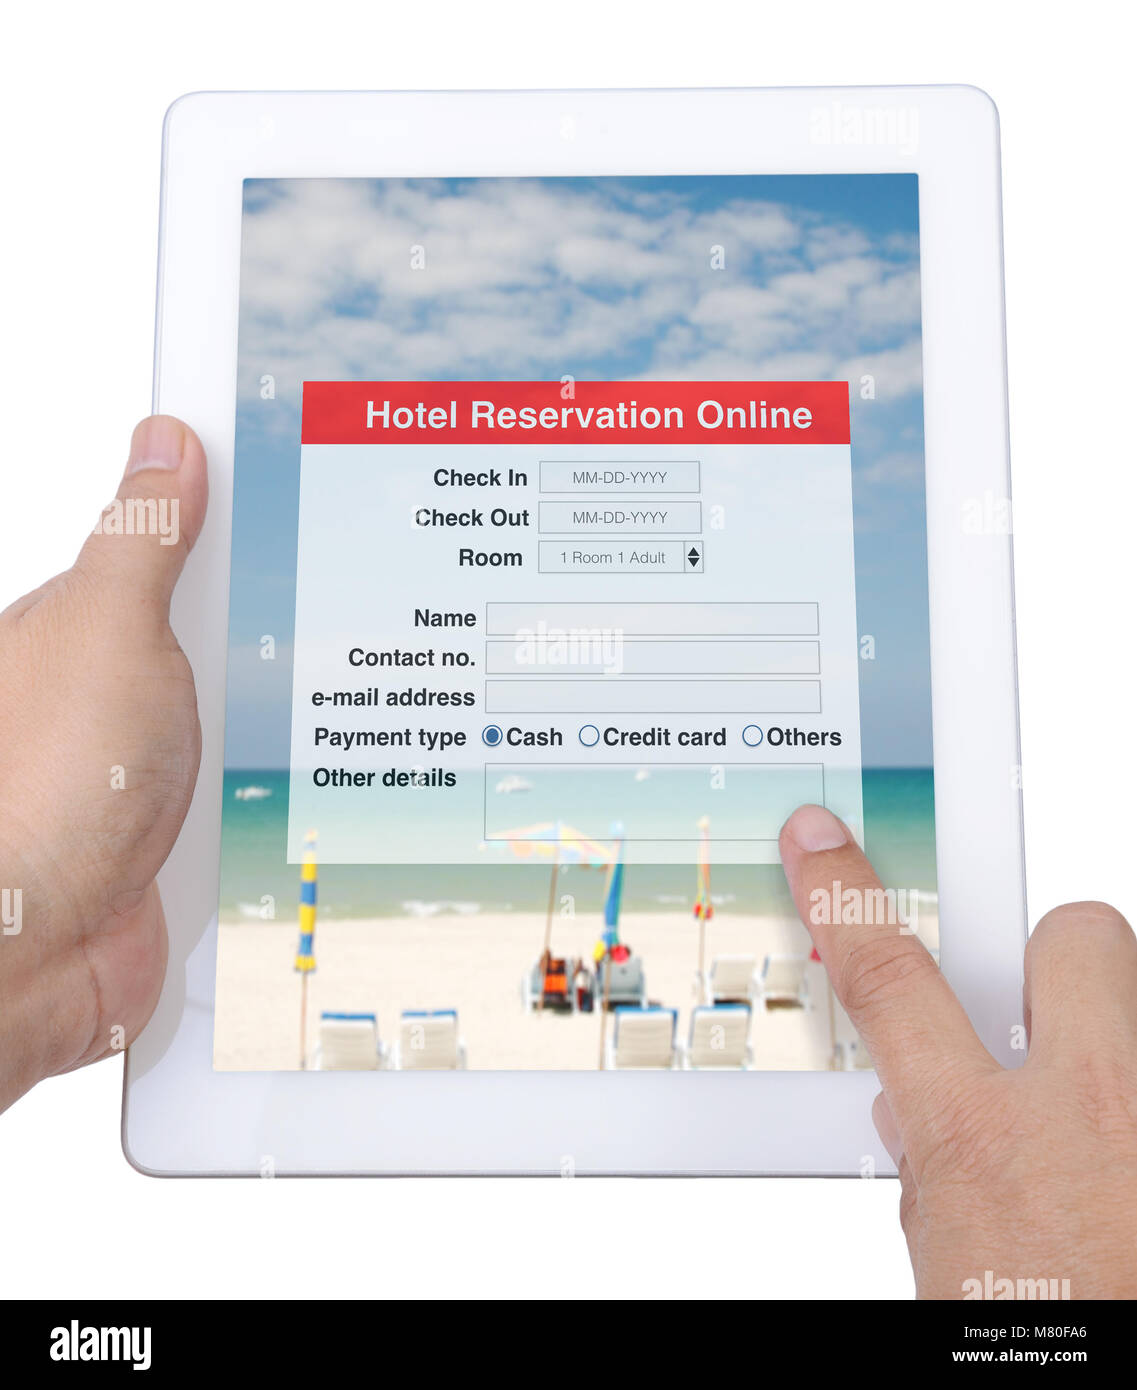 Internet application for hotel reservation online show on digital tablet in someone hand on white background. Stock Photo